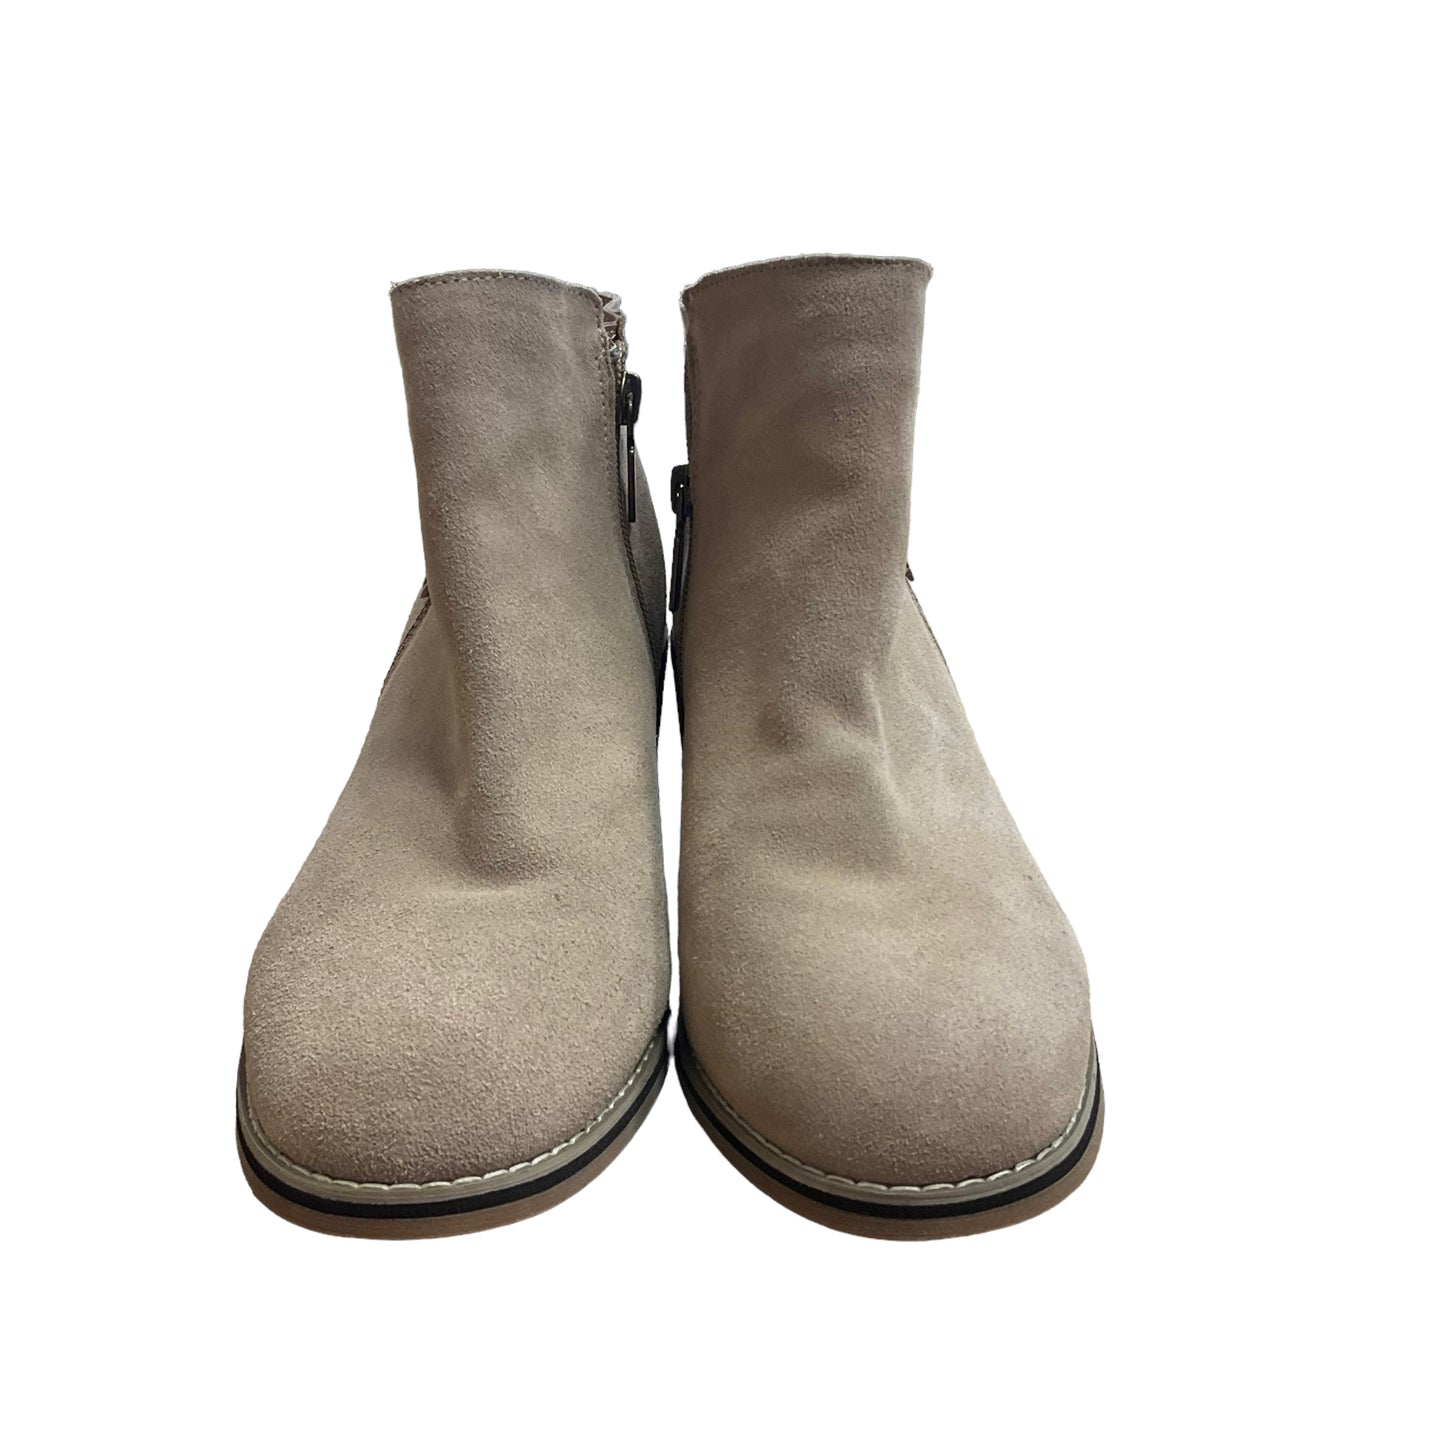 Boots Designer By Blondo  Size: 9.5